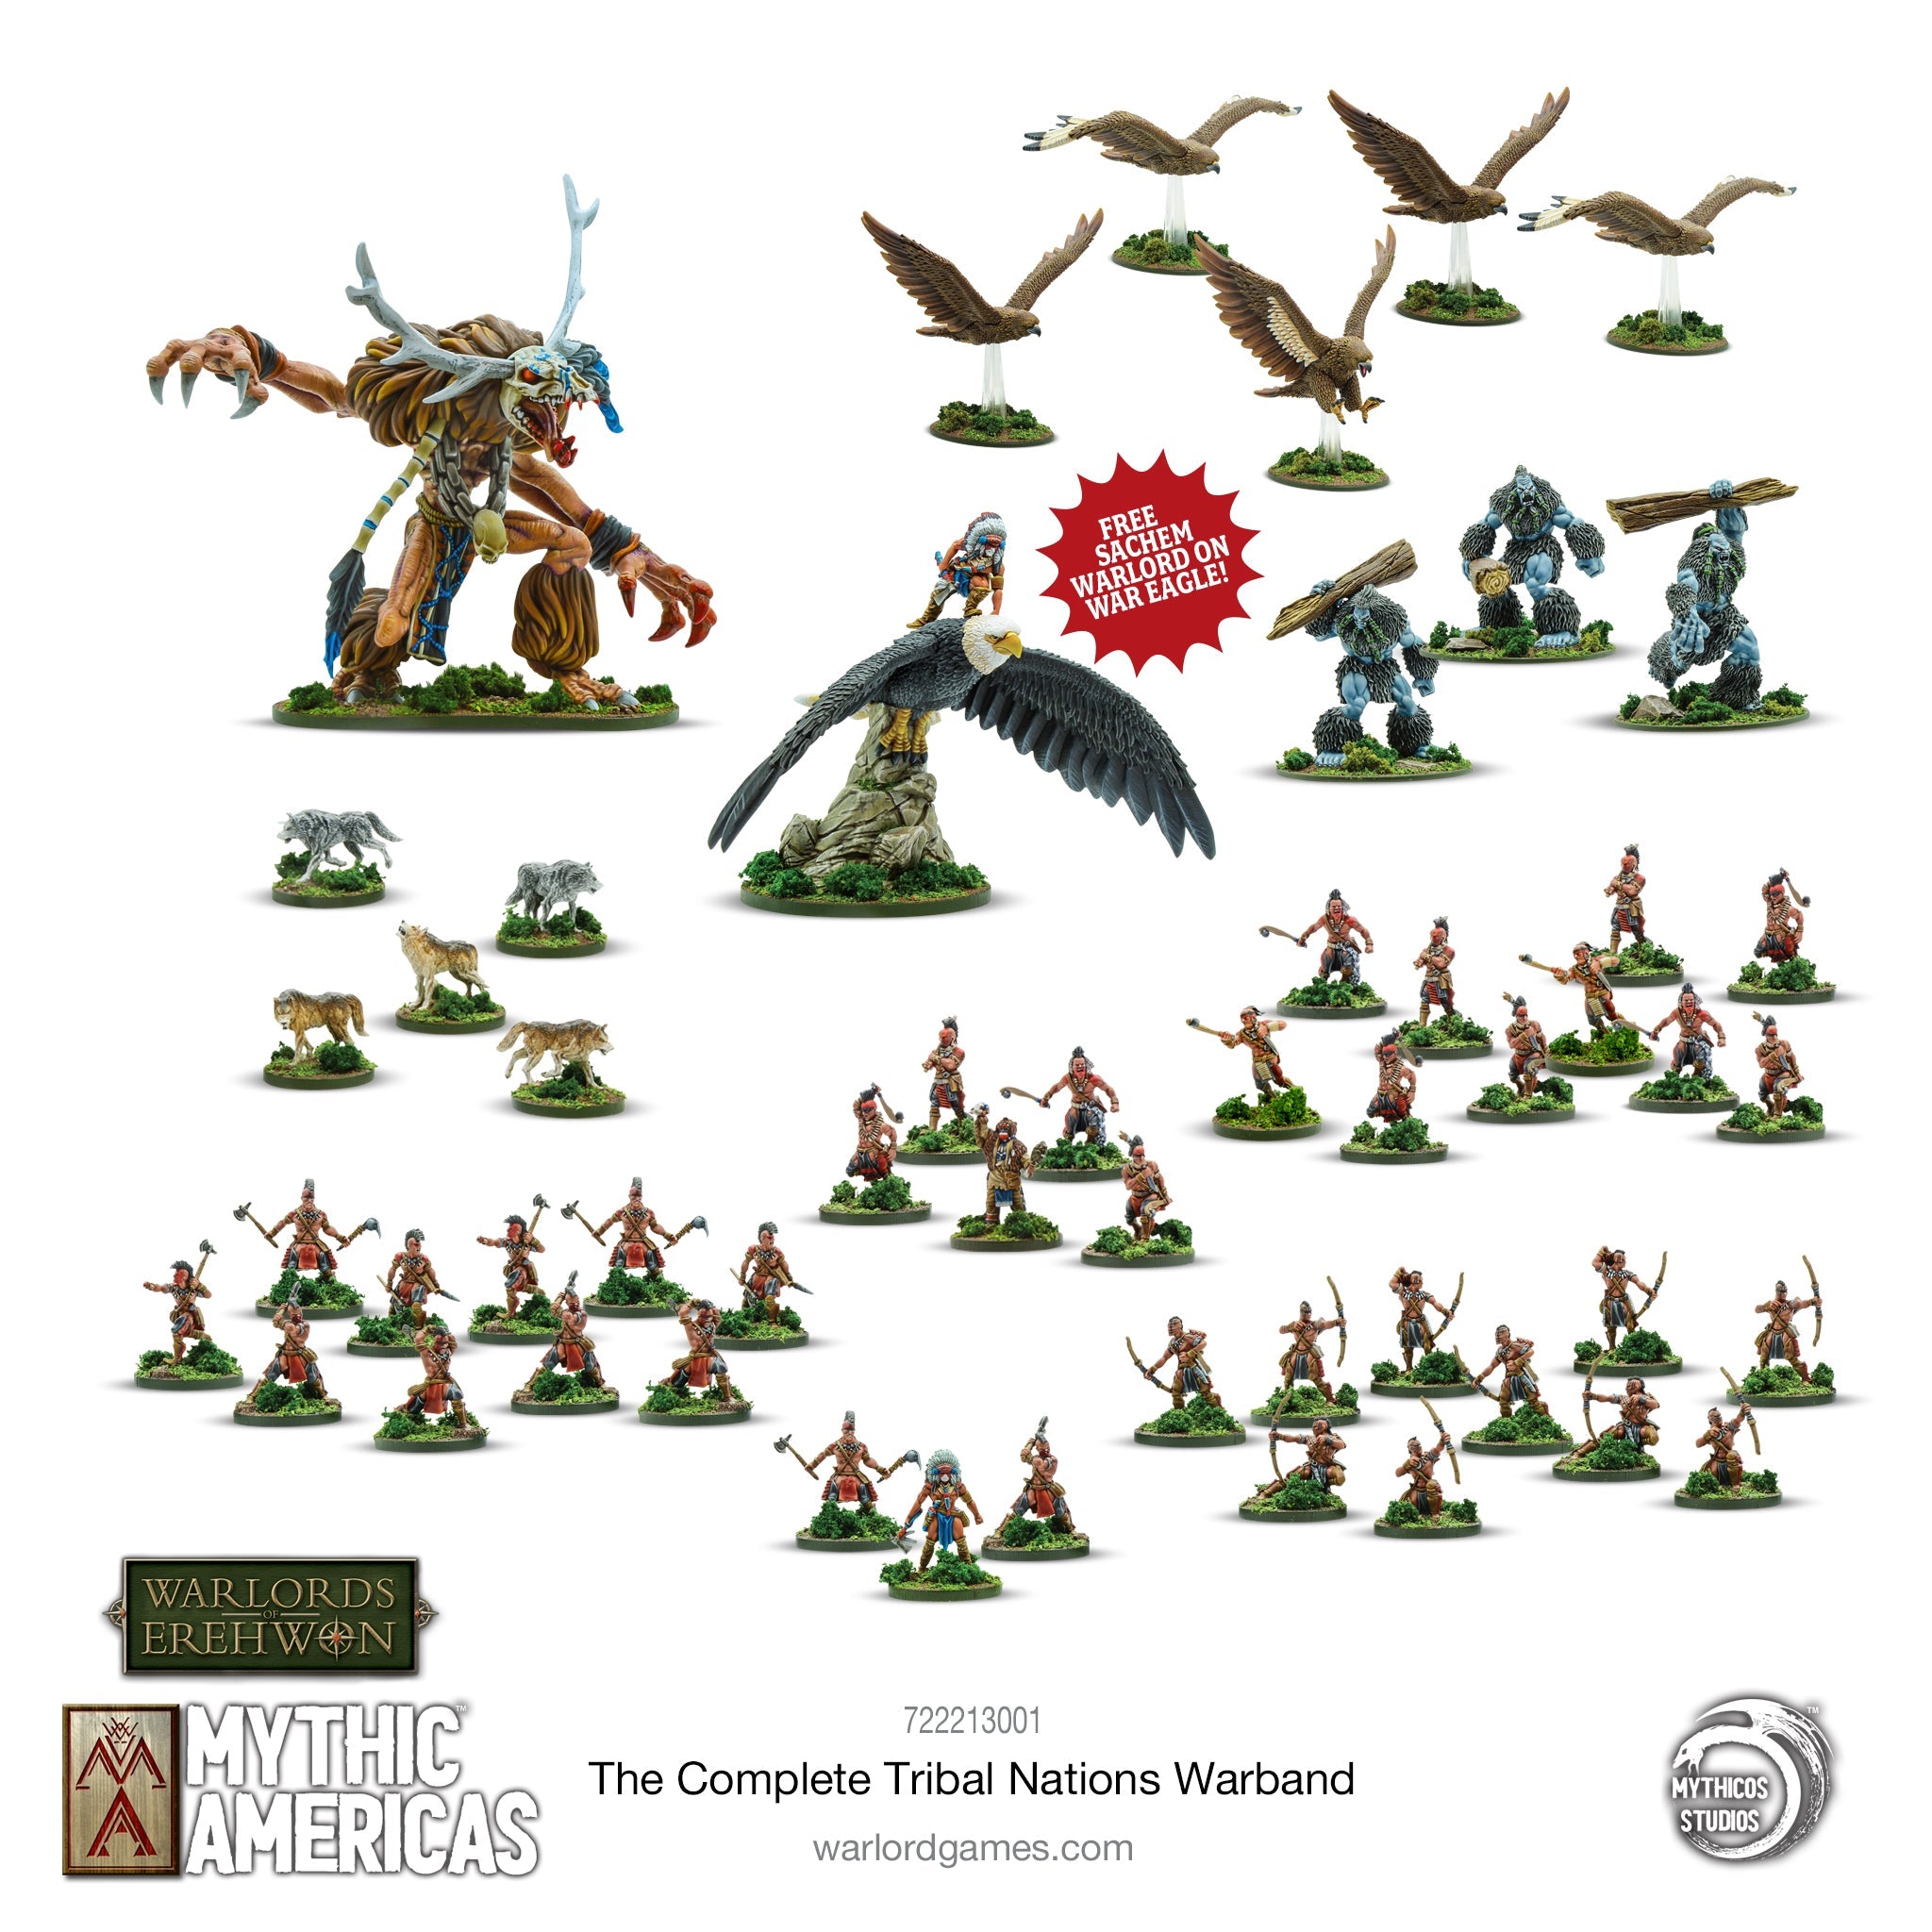 The Complete Tribal Nations Warband